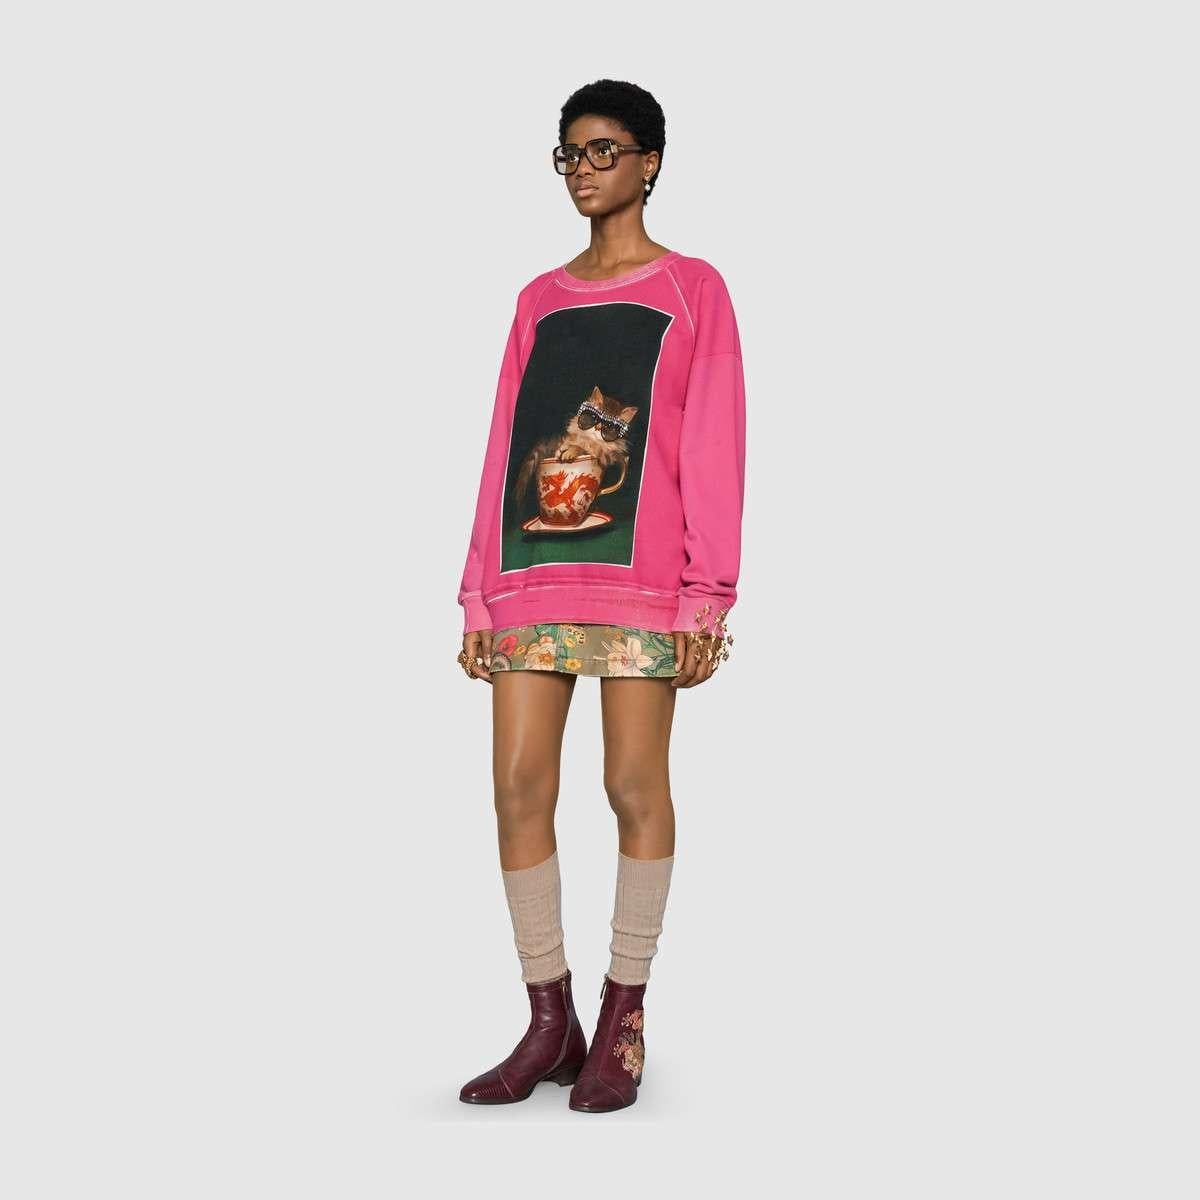 This is a Gucci 2018 Ignasi Monreal print Sweatshirt in a heavyweight pink cotton. Gucci collaborates with famed Spanish illustrator Ignasi Monreal to reimagine the house’s vision in his own way. Each piece was hand dyed and printed so has unique